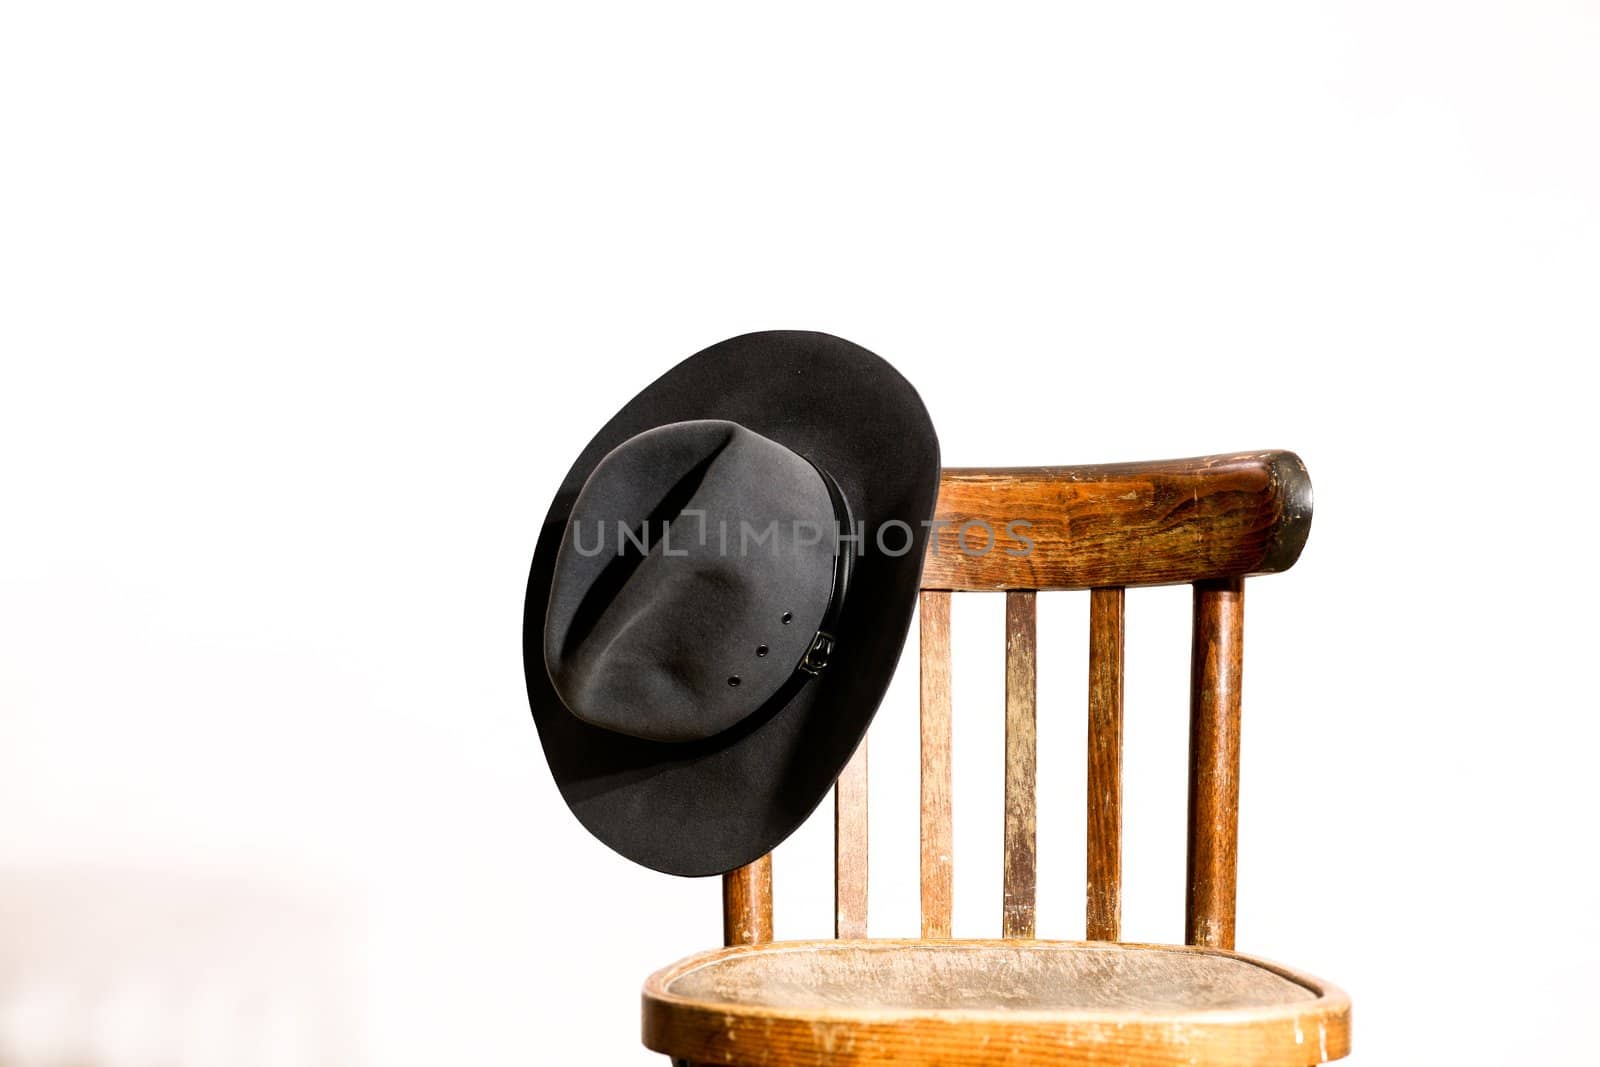 Chair with hat by velkol